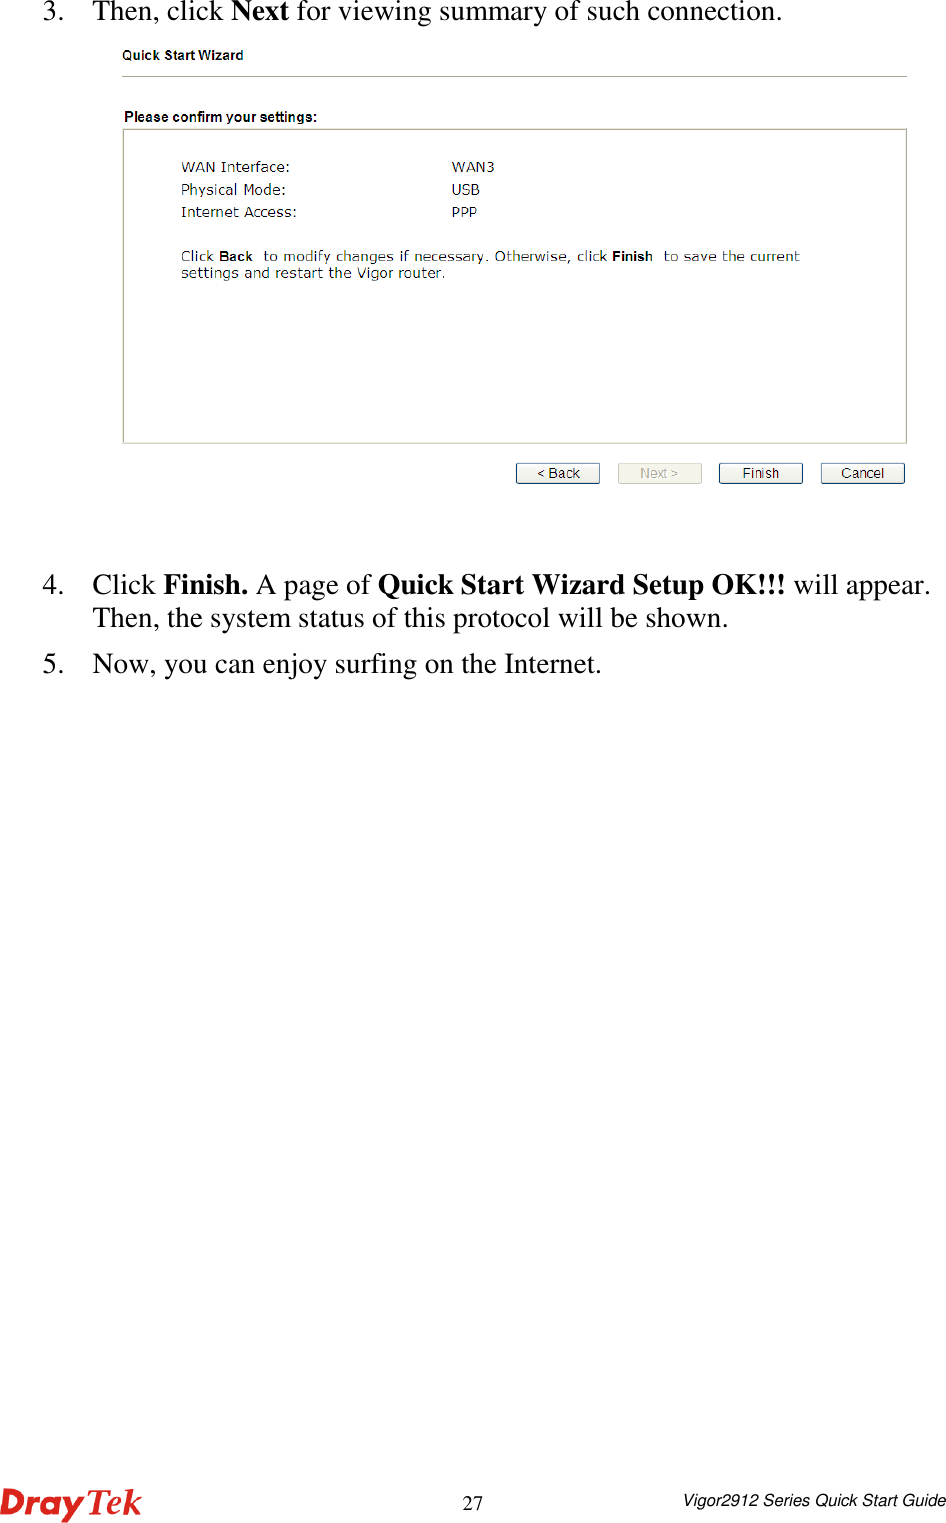  Vigor2912 Series Quick Start Guide 273. Then, click Next for viewing summary of such connection.   4. Click Finish. A page of Quick Start Wizard Setup OK!!! will appear. Then, the system status of this protocol will be shown. 5. Now, you can enjoy surfing on the Internet. 